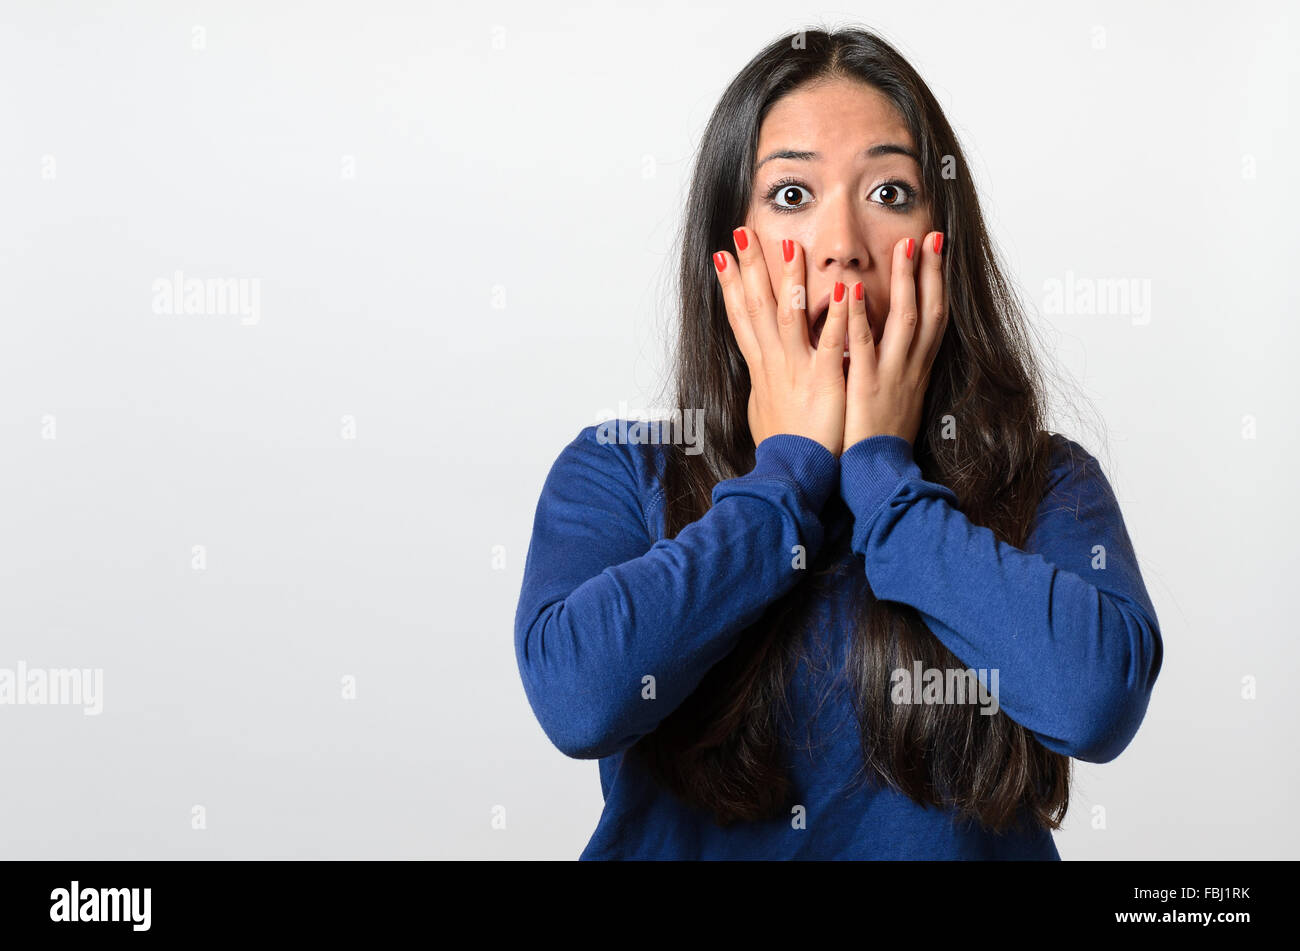 Woman reacting in terror and panic holding her hands to her cheeks as she screams , upper body on white Stock Photo